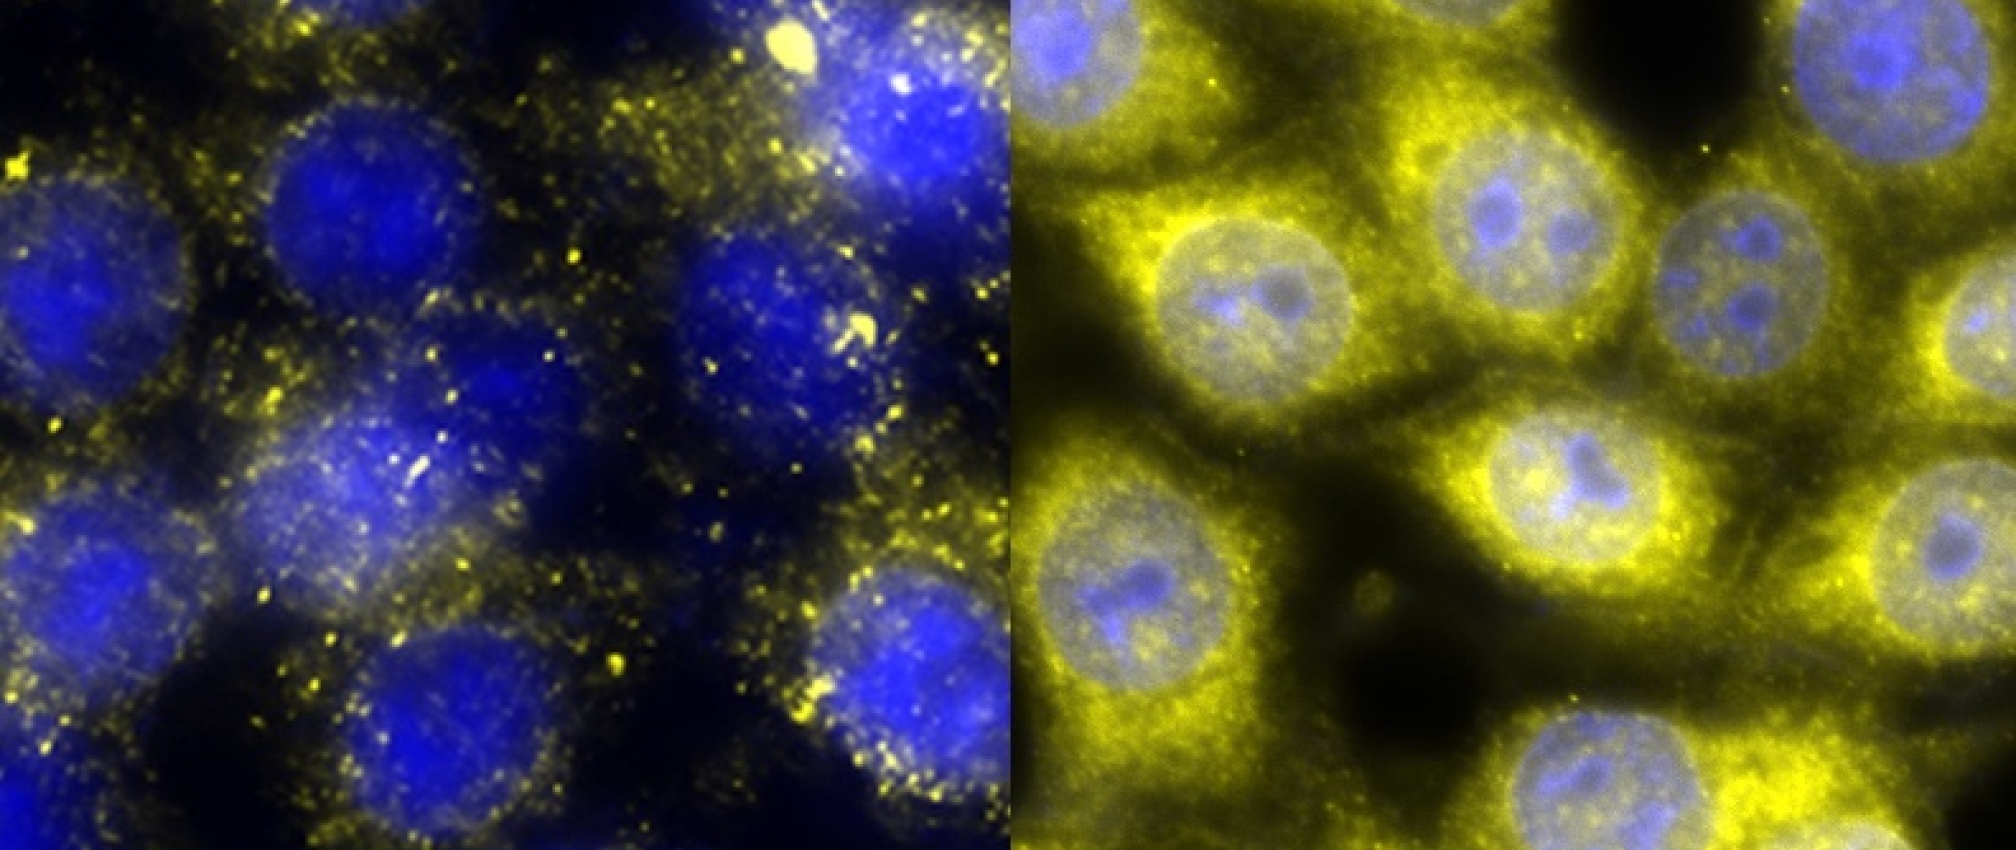 APC is a tumor suppressor that negatively regulates the Wnt pathway. RKO cells with wild-type (left) and knocked out APC (right). These cells have been stained for beta-catenin (yellow) and DNA (blue) Note the intense staining of beta-catenin upon loss of APC.